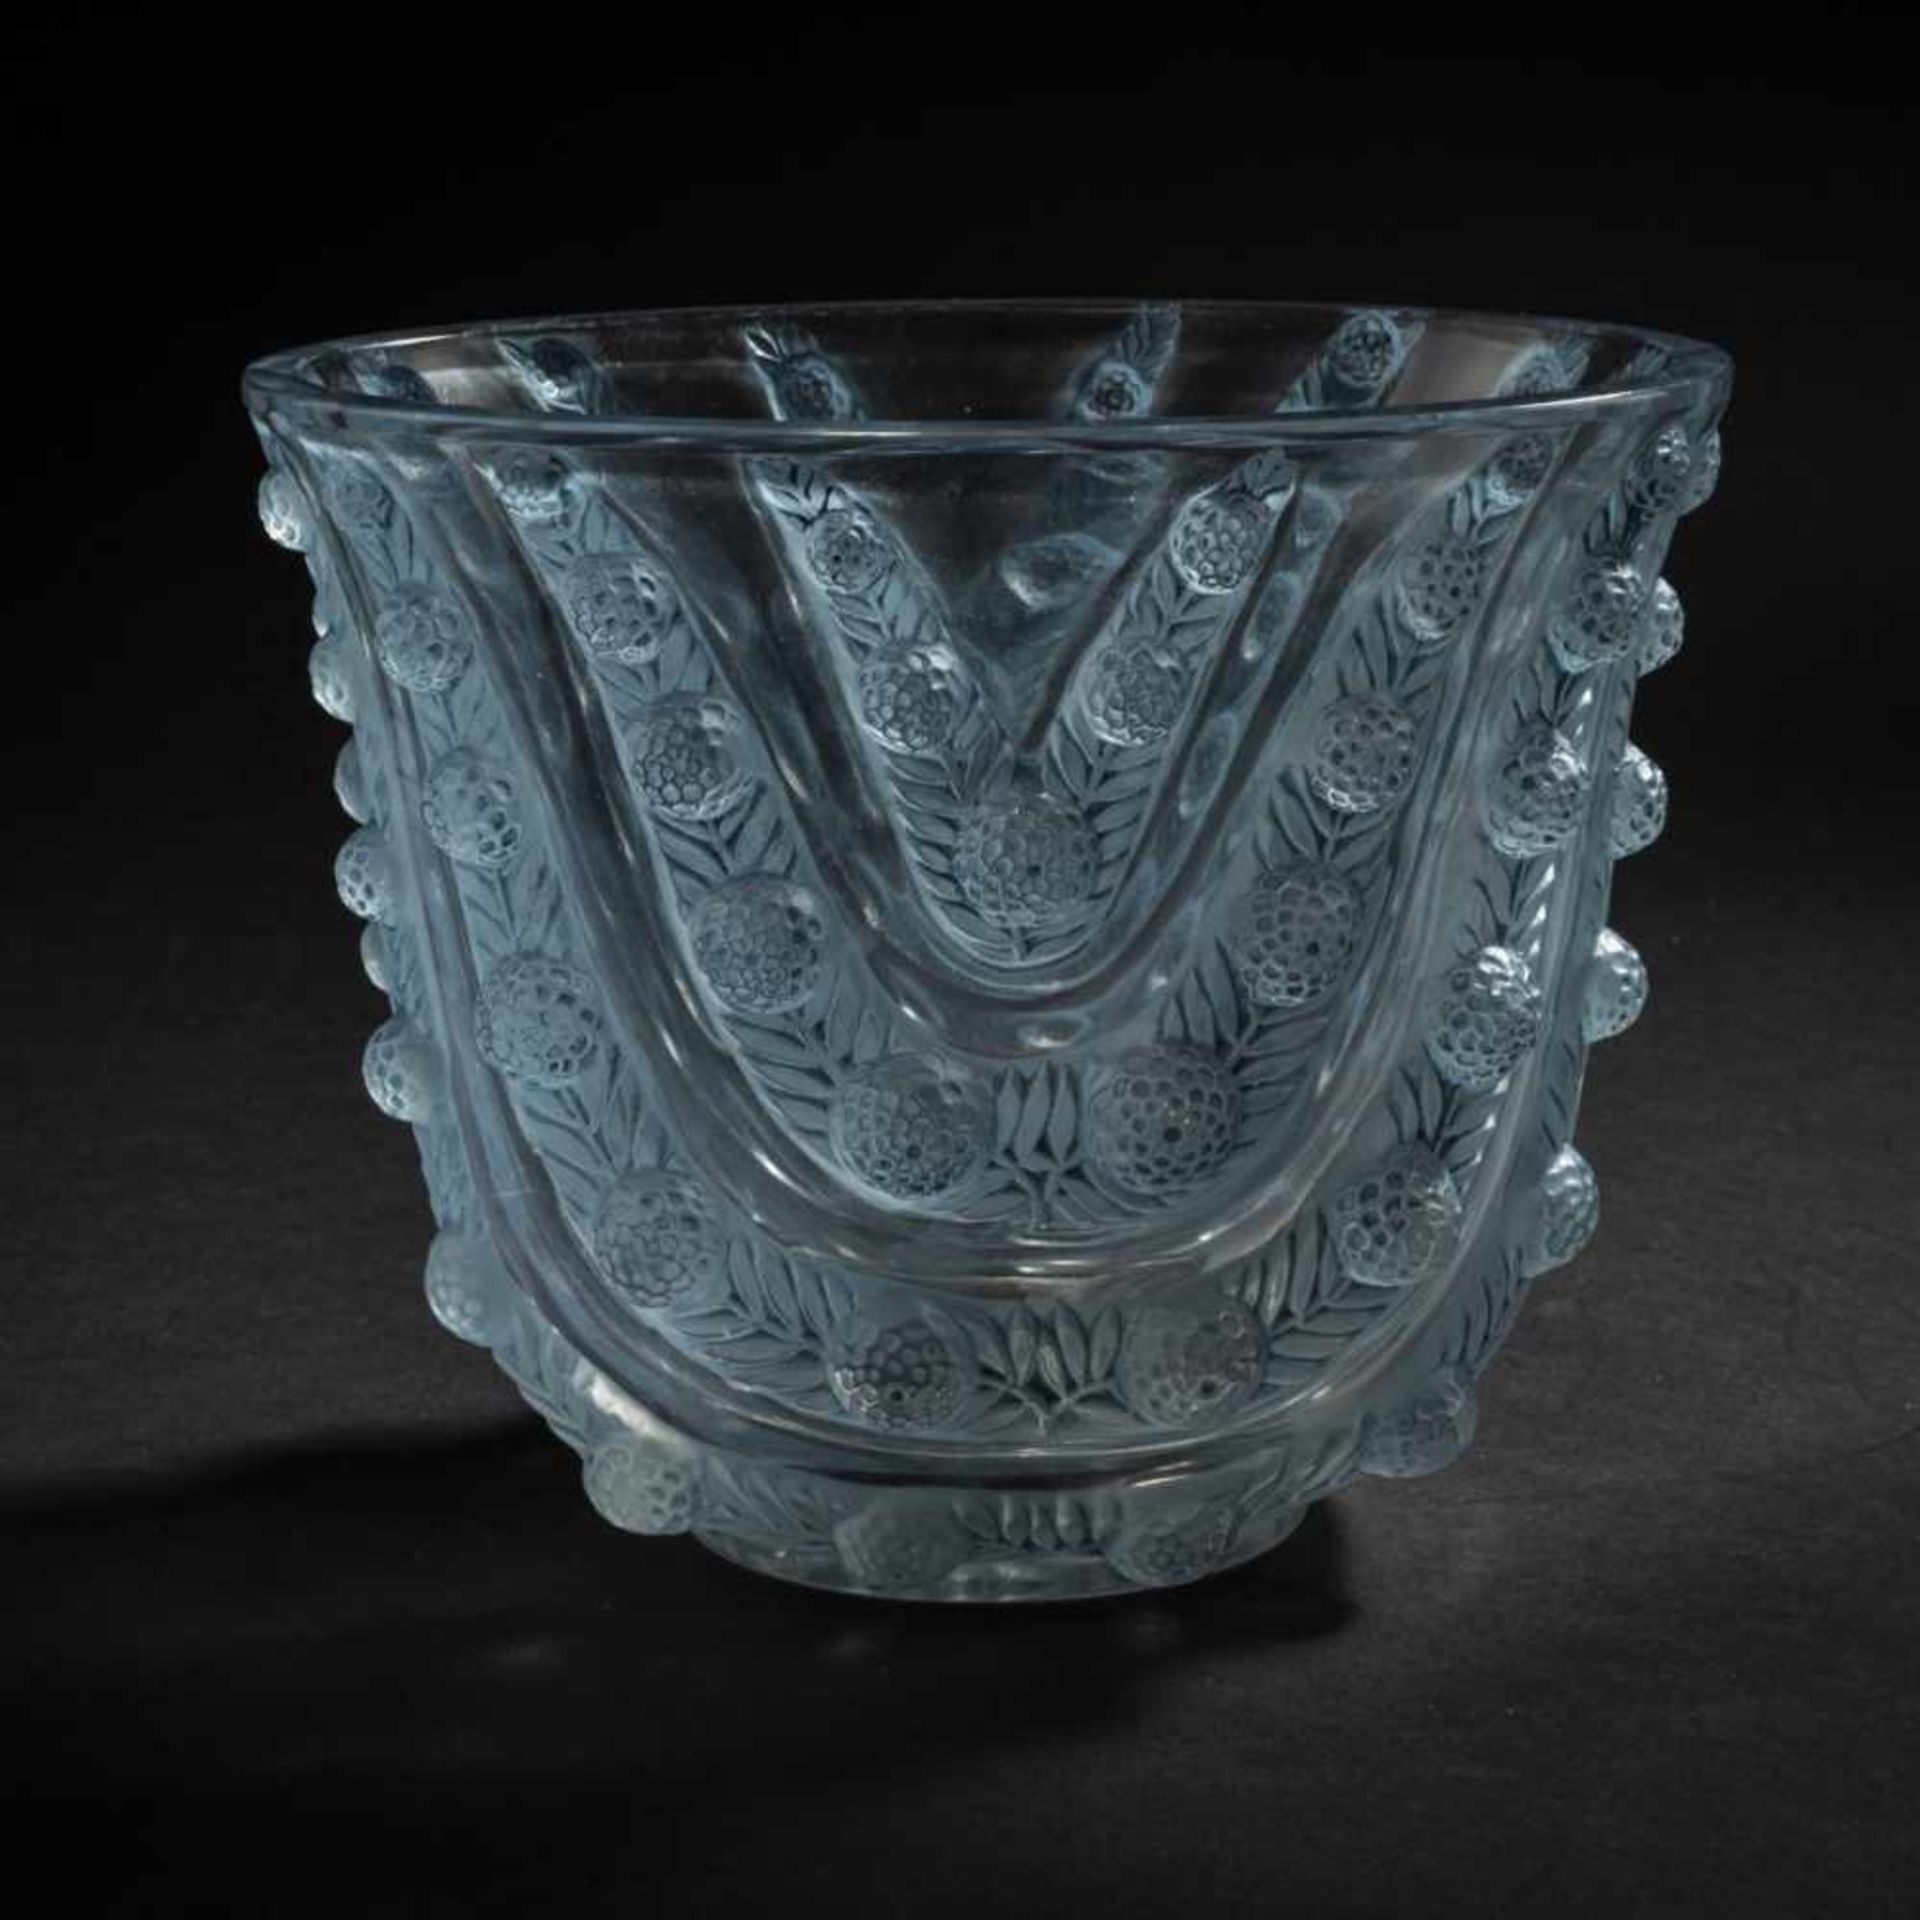 René Lalique, 'Vichy' vase, 1937'Vichy' vase, 1937H. 17 cm. Clear, moulded glass, partially satined,